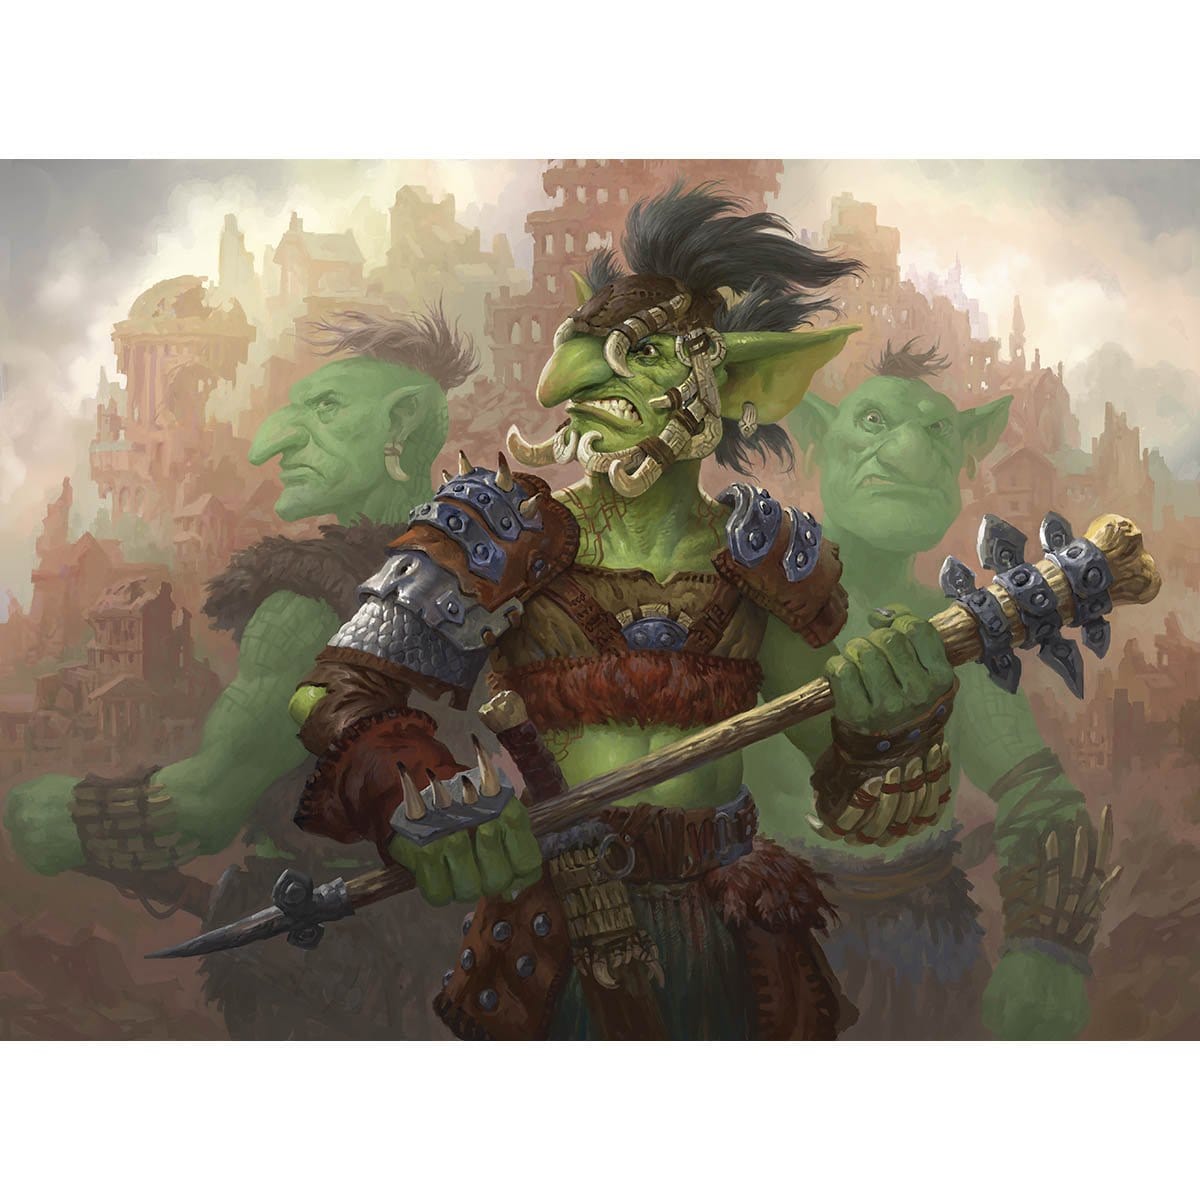 Goblin Gang Leader Print - Print - Original Magic Art - Accessories for Magic the Gathering and other card games